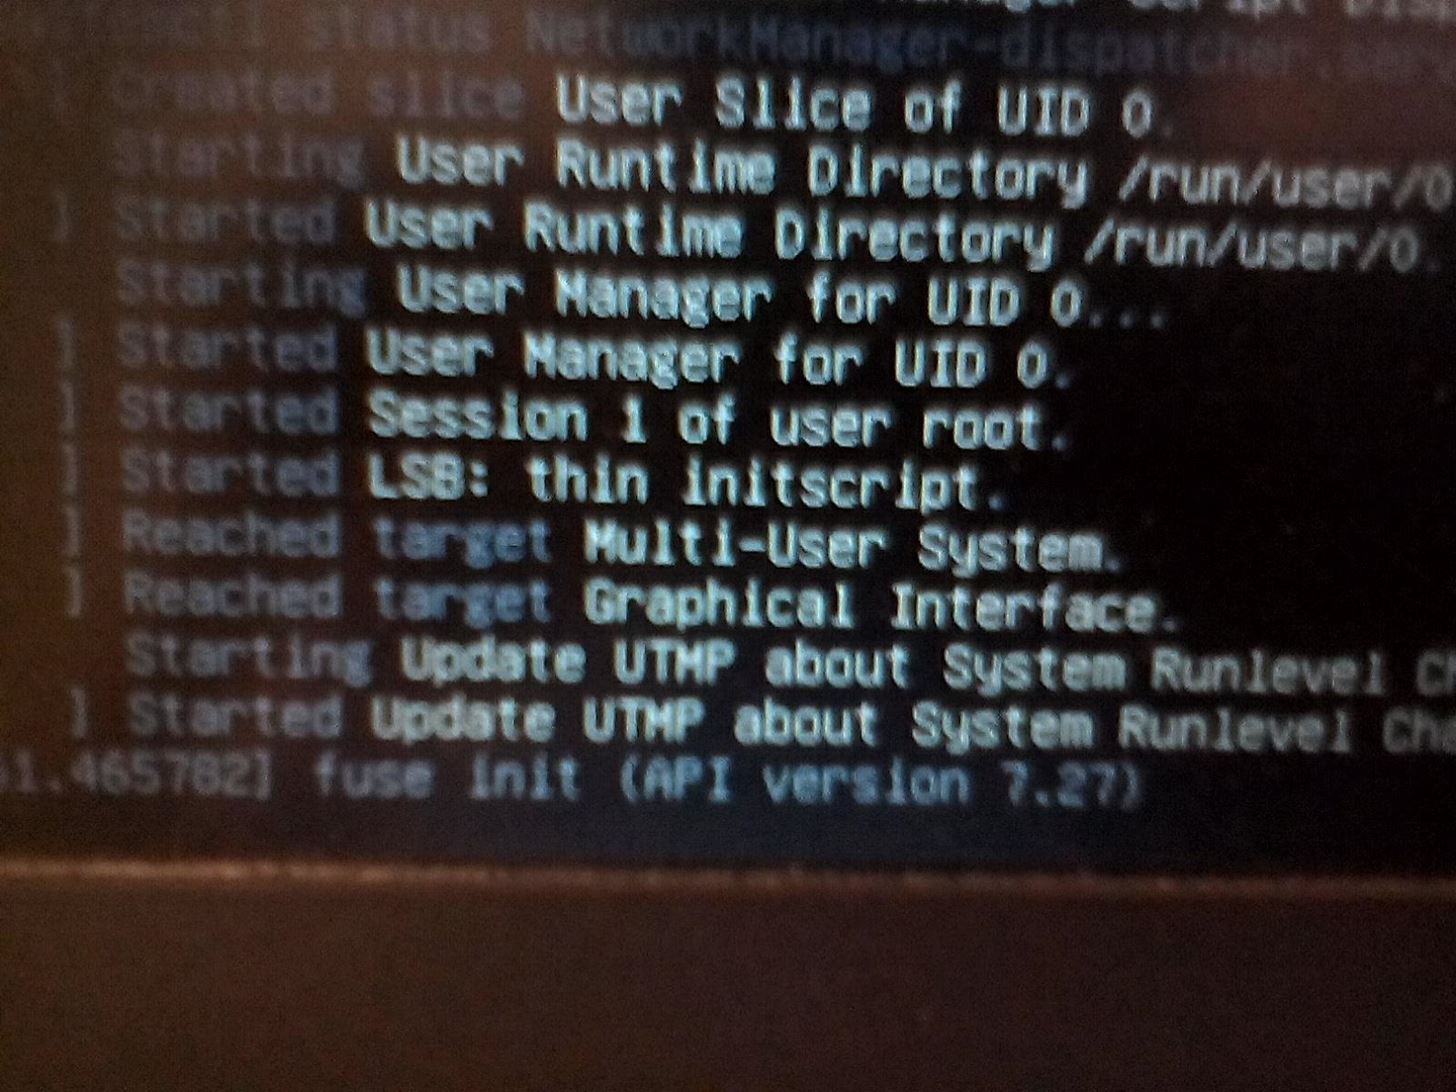 Failed to Boot Kali Linux from My Persistance Usb